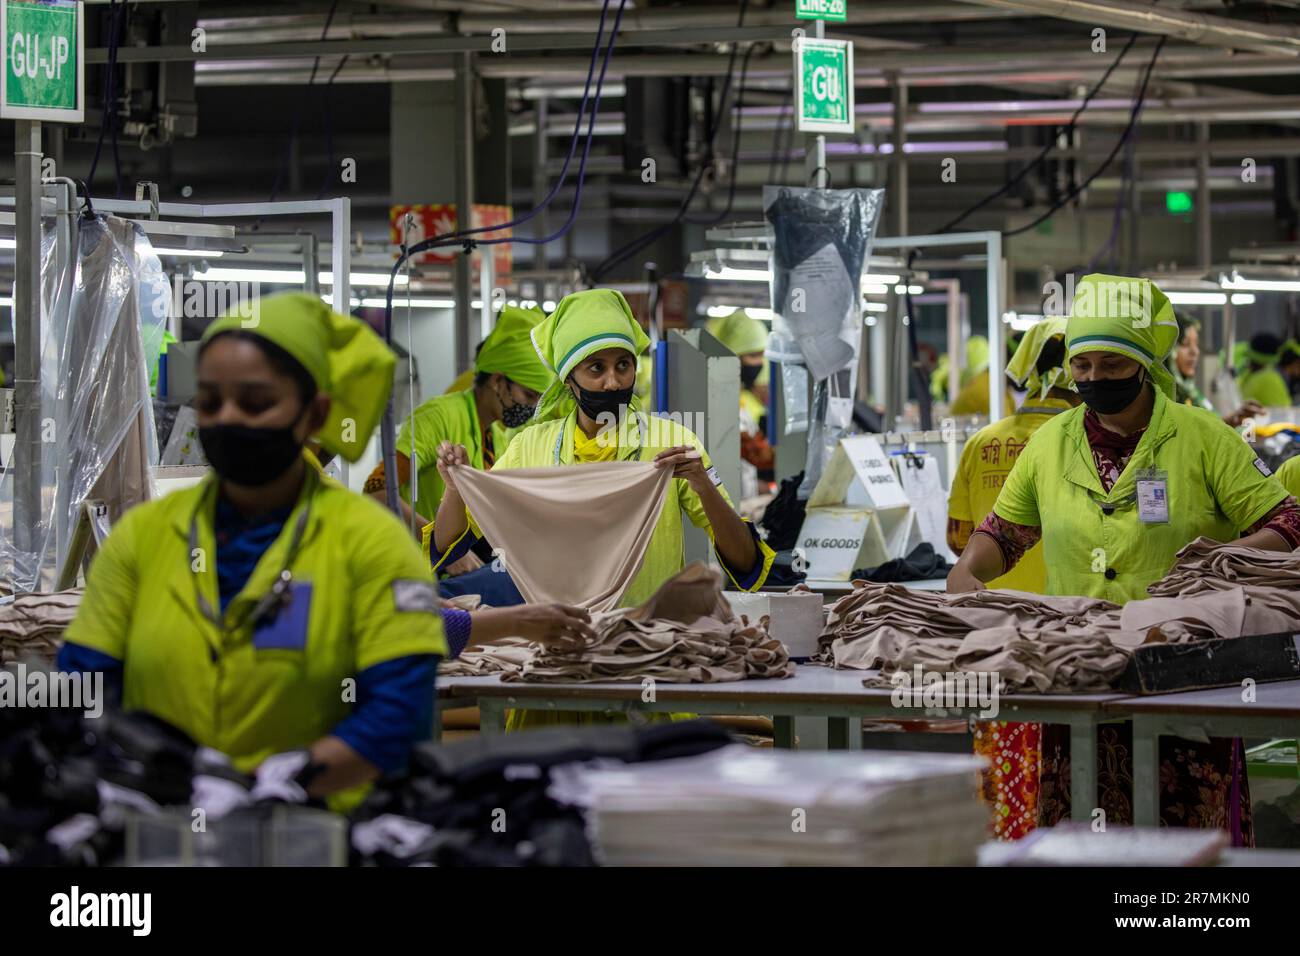 Ready-made garments (RMG) workers working in a LEED Certified Green Garment factory at Adamjee Export Processing Zone in Narayanganj, Bangladesh. Stock Photo